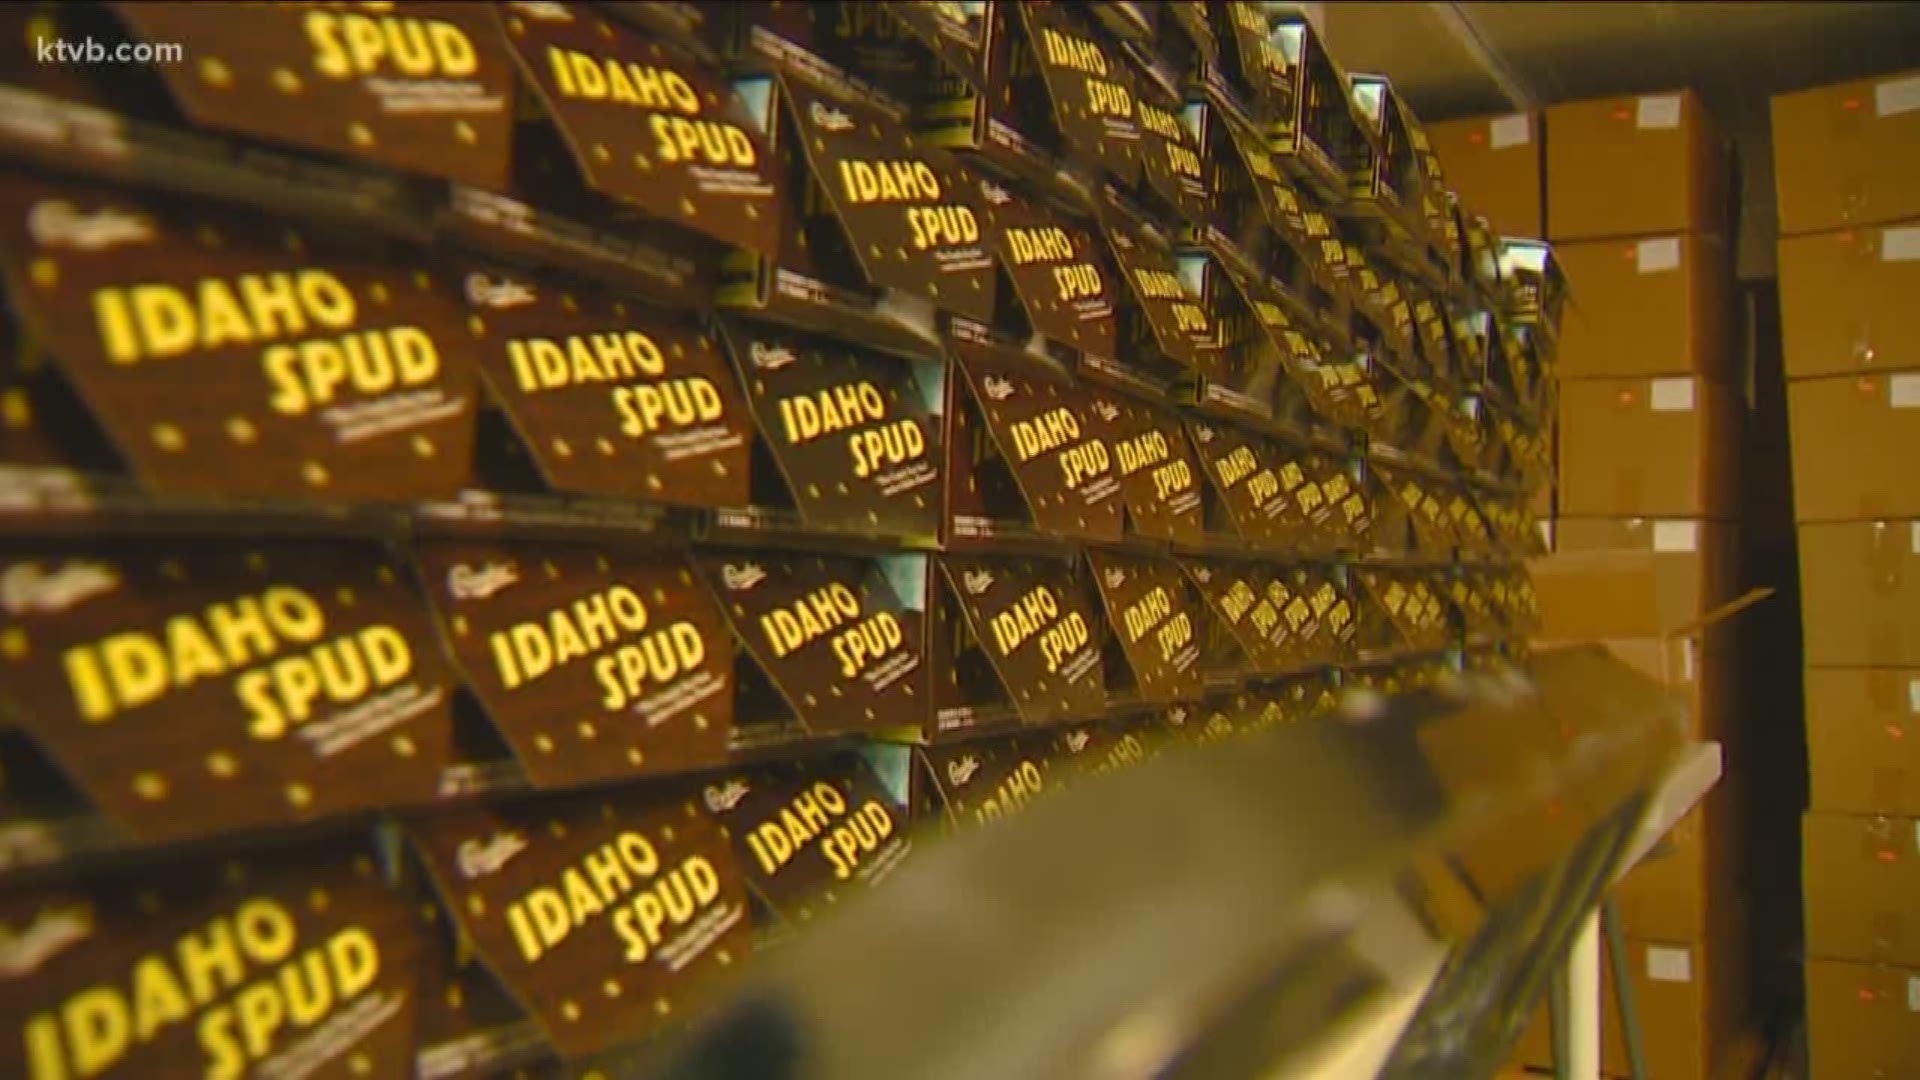 The Idaho Candy Company on 8th Street has been churning out these tasty spuds for over 100 years. We got an inside look at the company's Boise plant